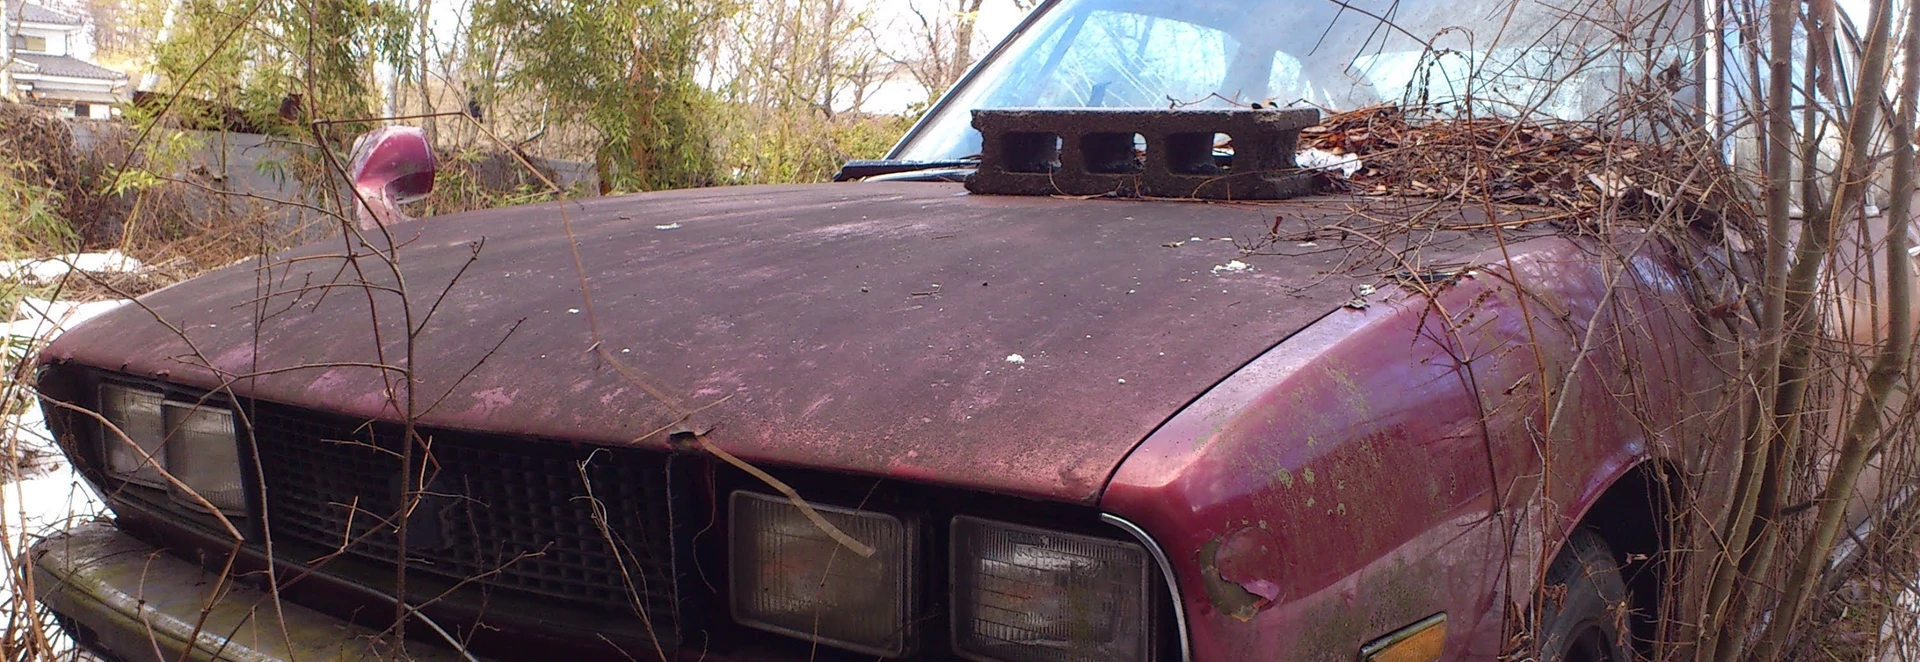 These rare Japanese cars left abandoned in Hong Kong will make you weep 